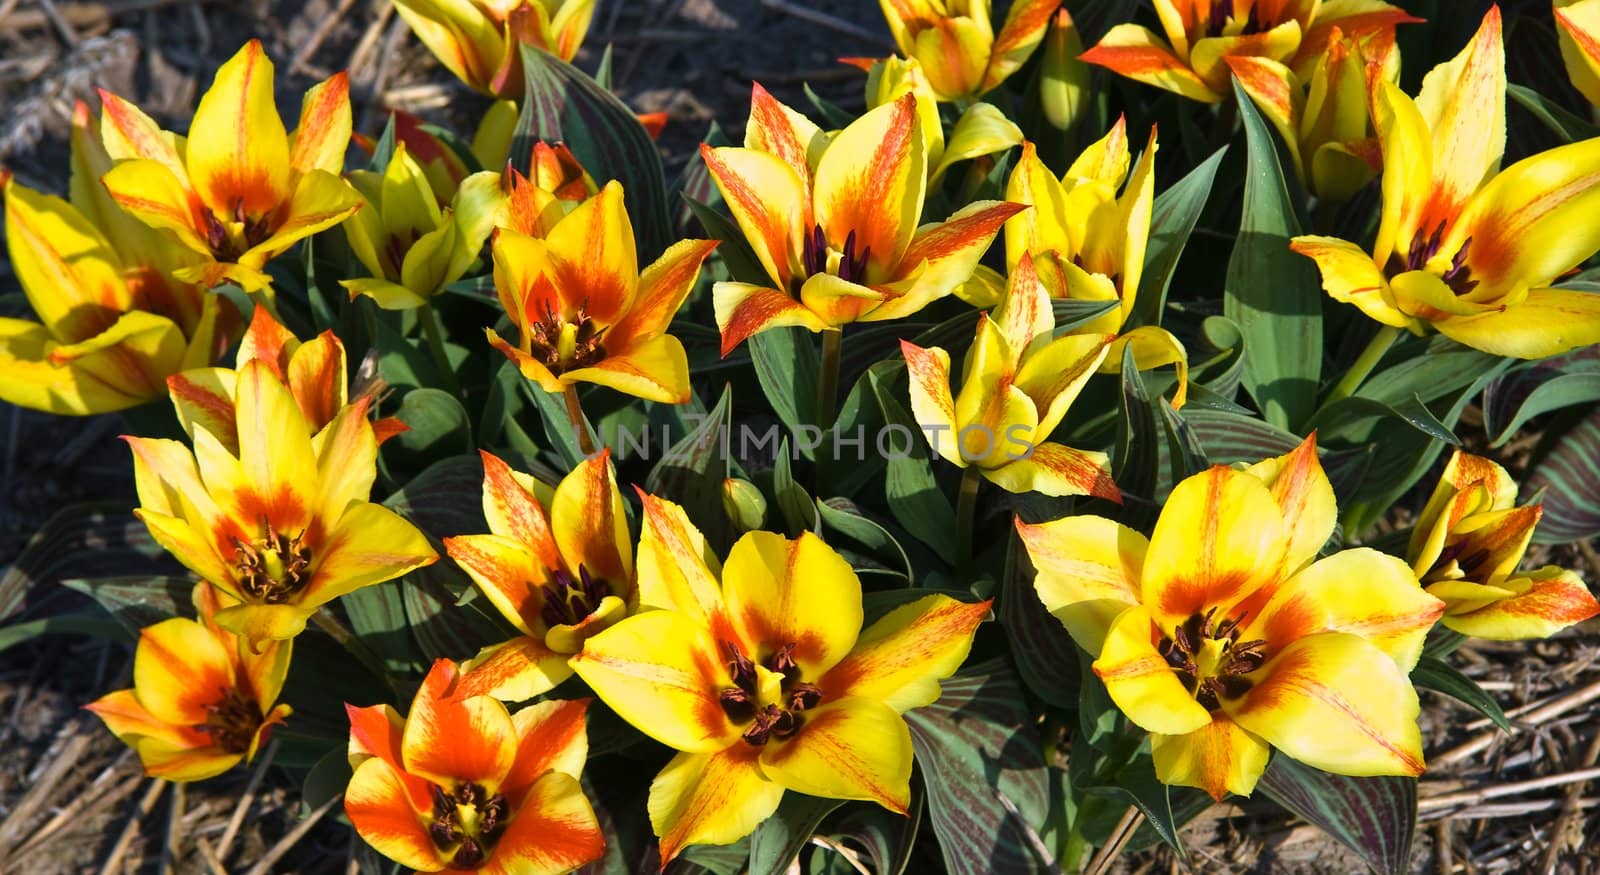 Group of small tulips in yellow and red by Colette